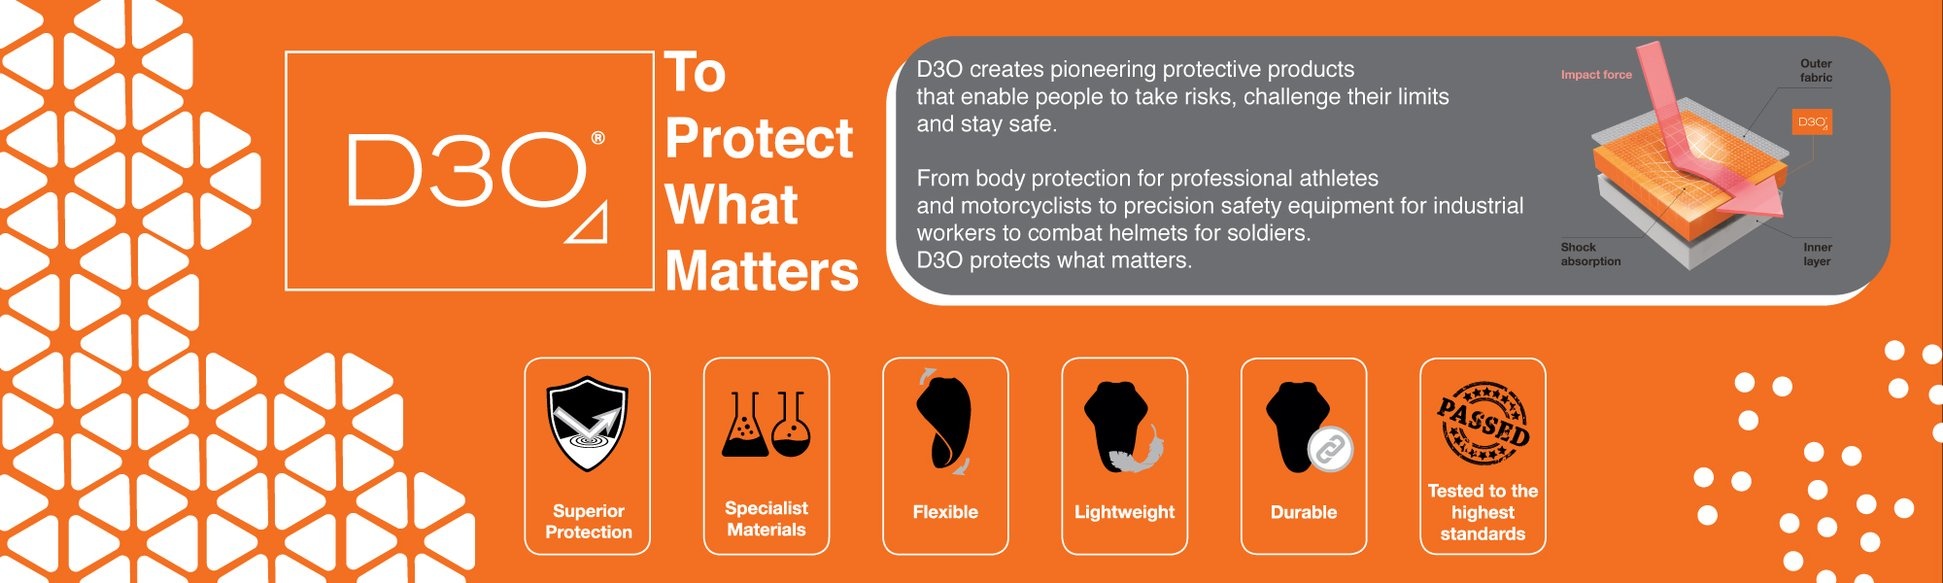 More about D3O protection